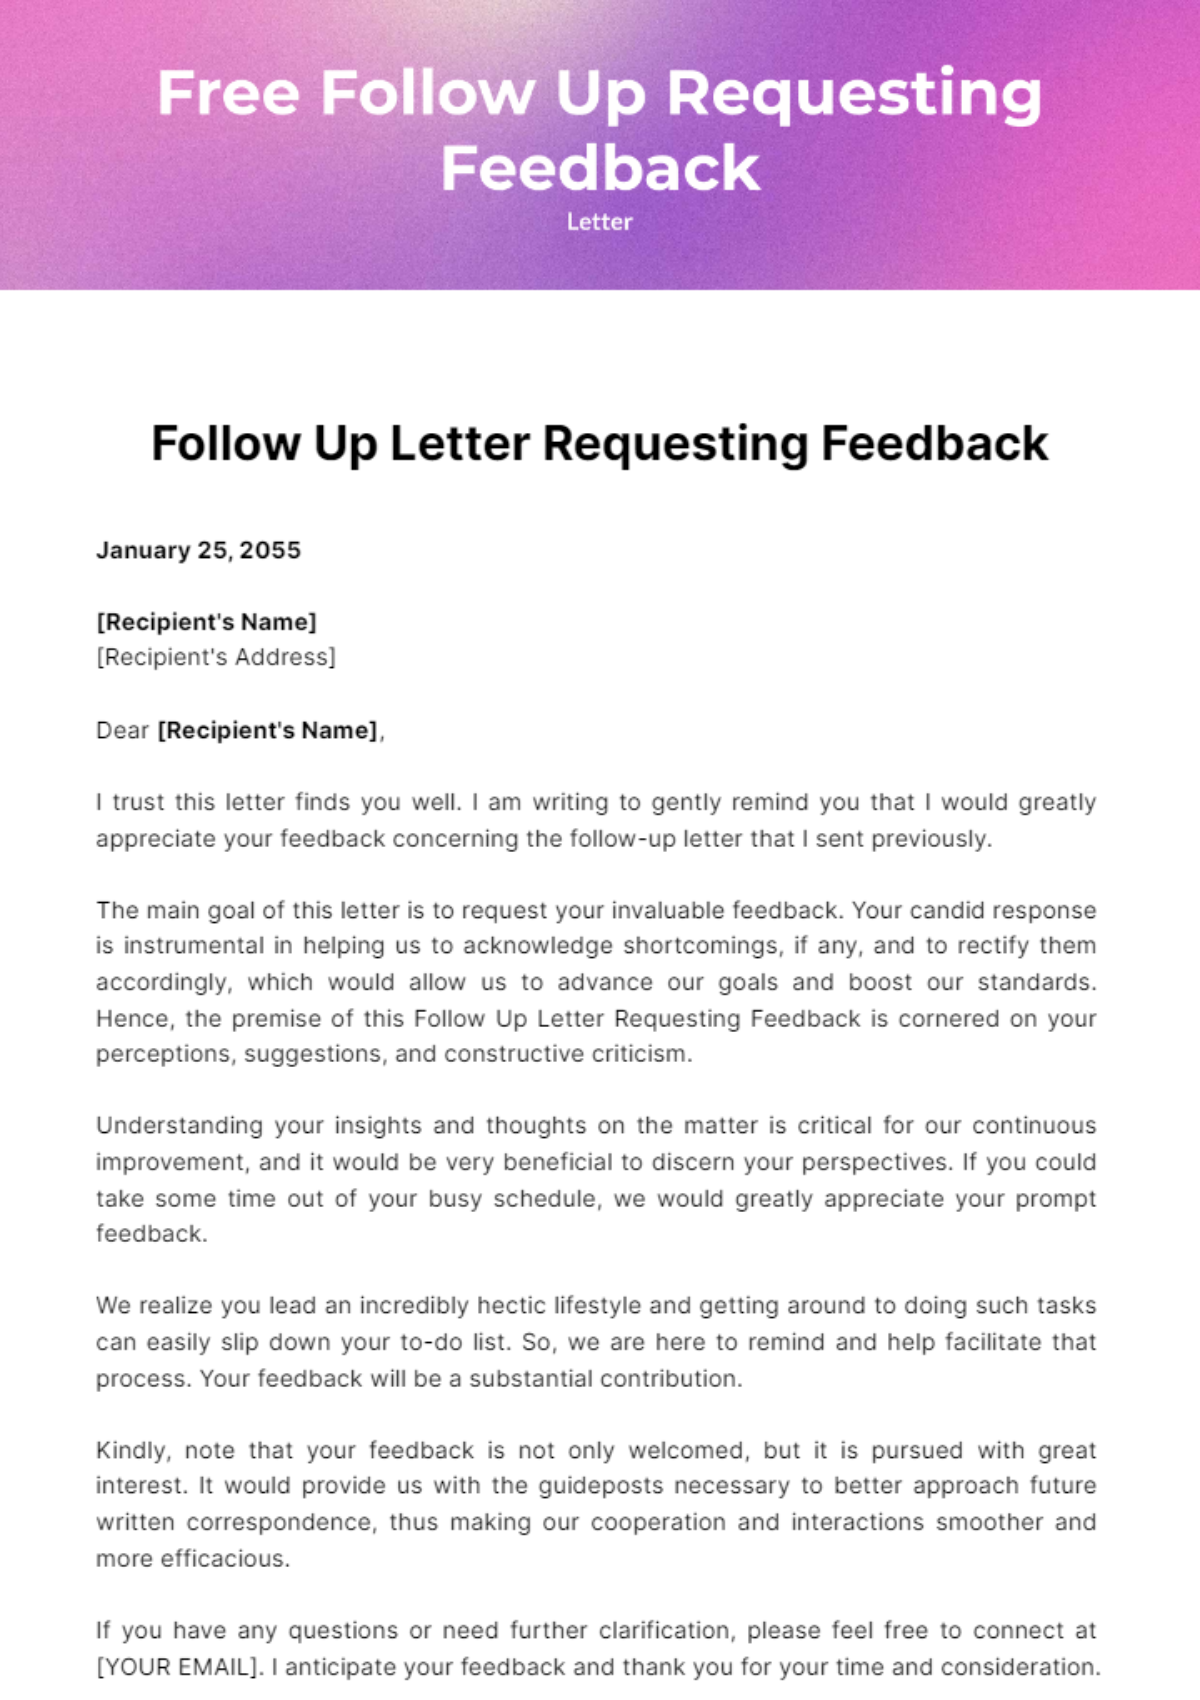 Free Follow Up Letter Requesting Feedback Template